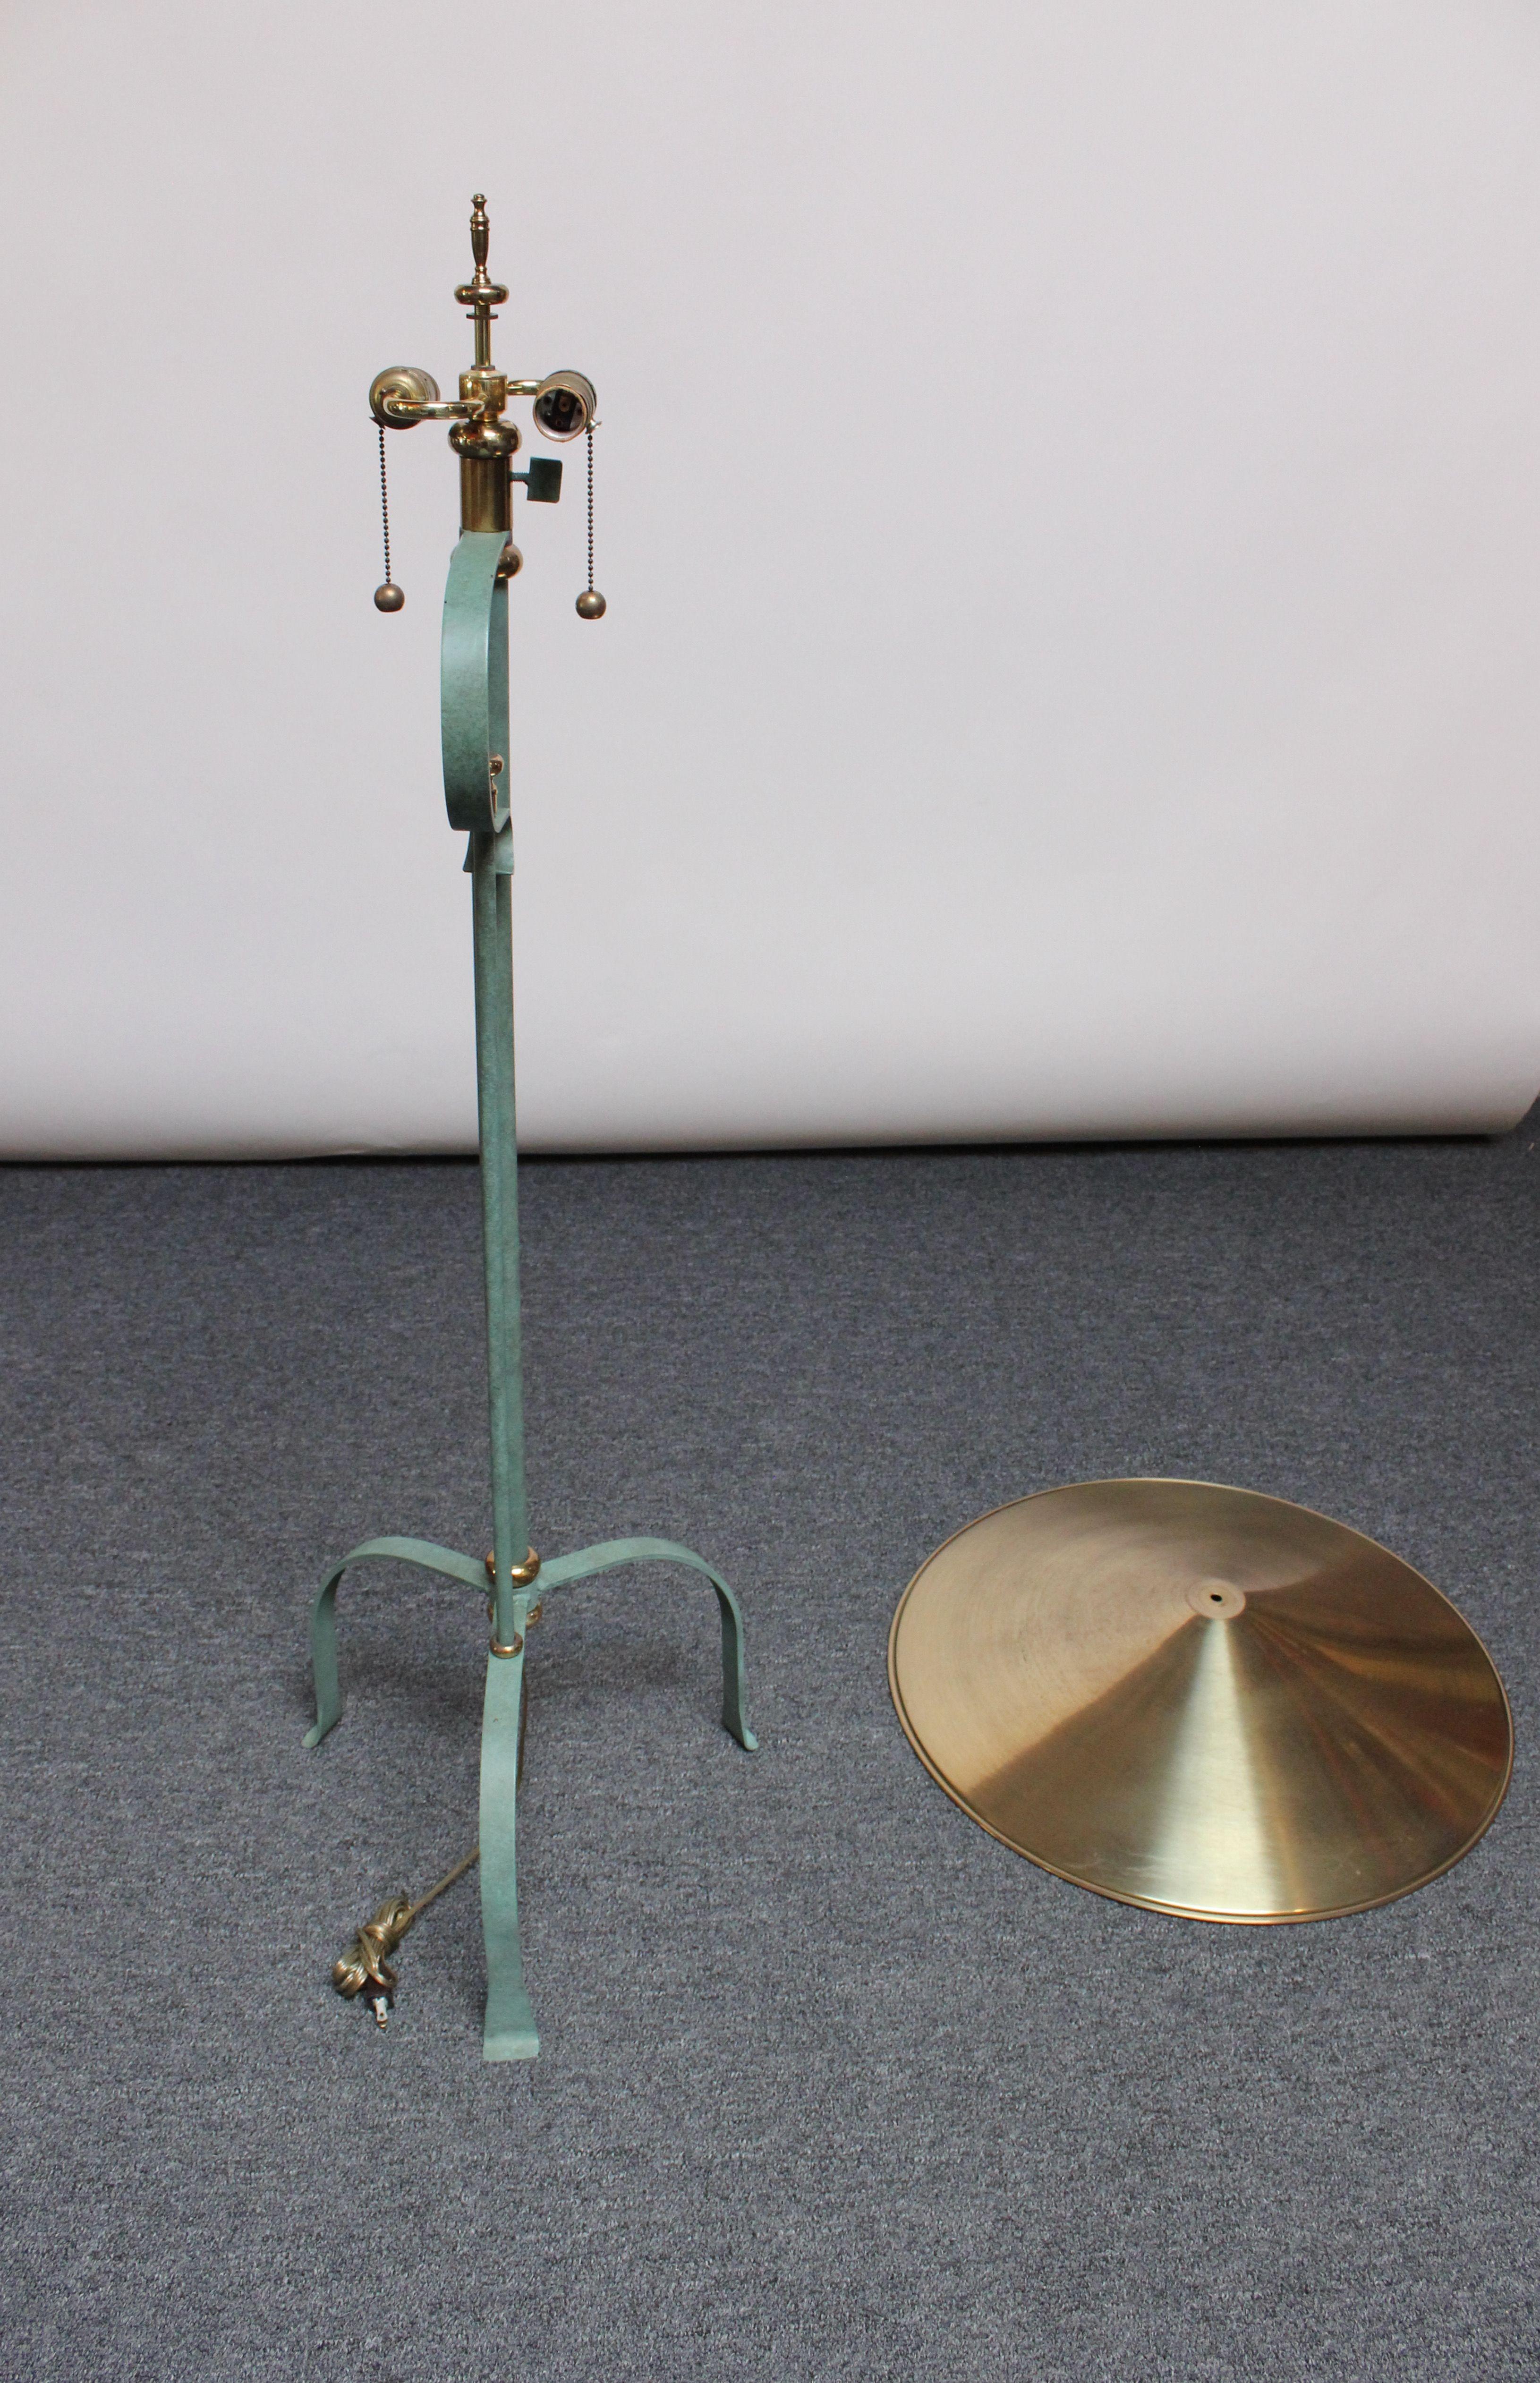 Metal floor lamp with verdigris patina, brass embellishments and the original brass shade, all supported by a tripod base (ca. 1980s, USA). Excellent, vintage condition sans minor spots of loss to the applied verdigris finish, as shown, along with